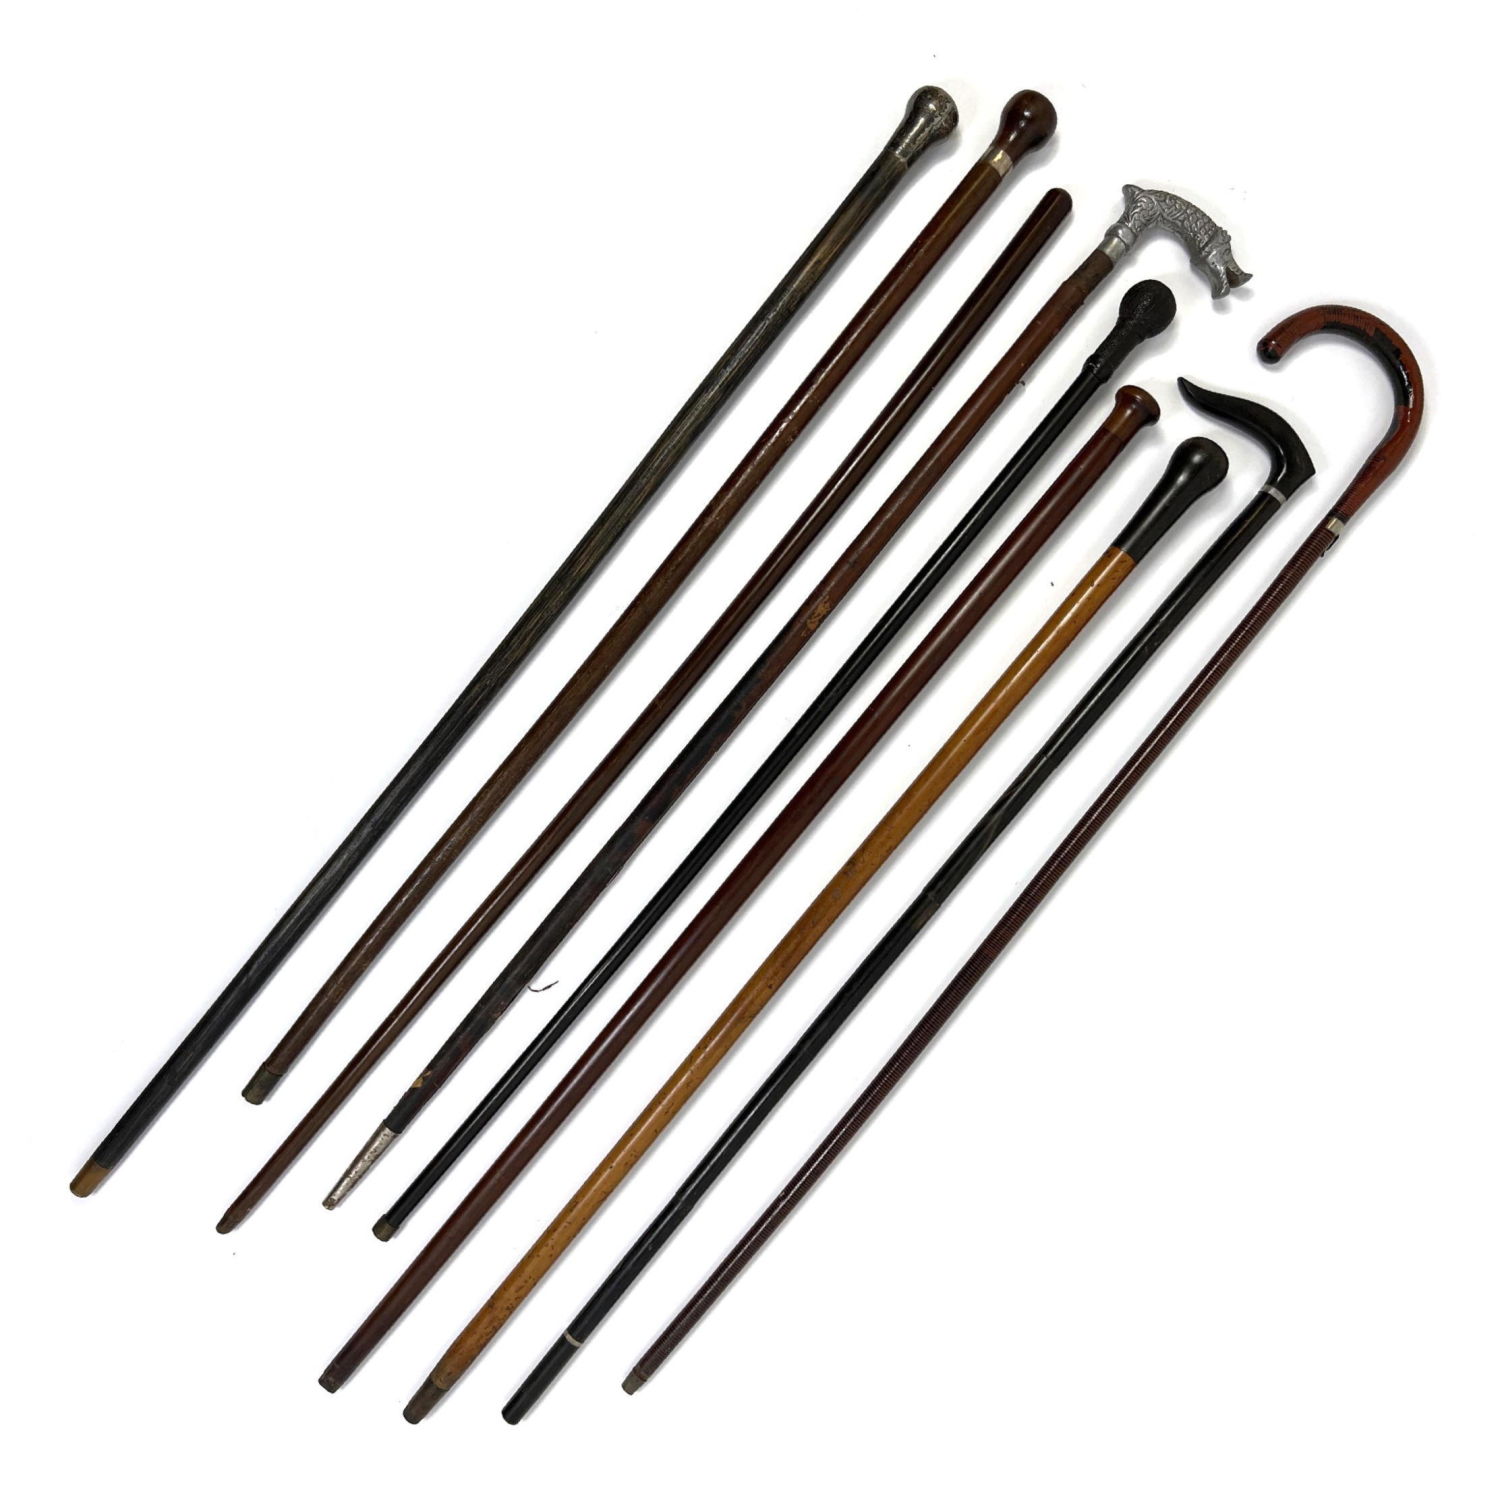 9pcs Vintage Canes and Walking